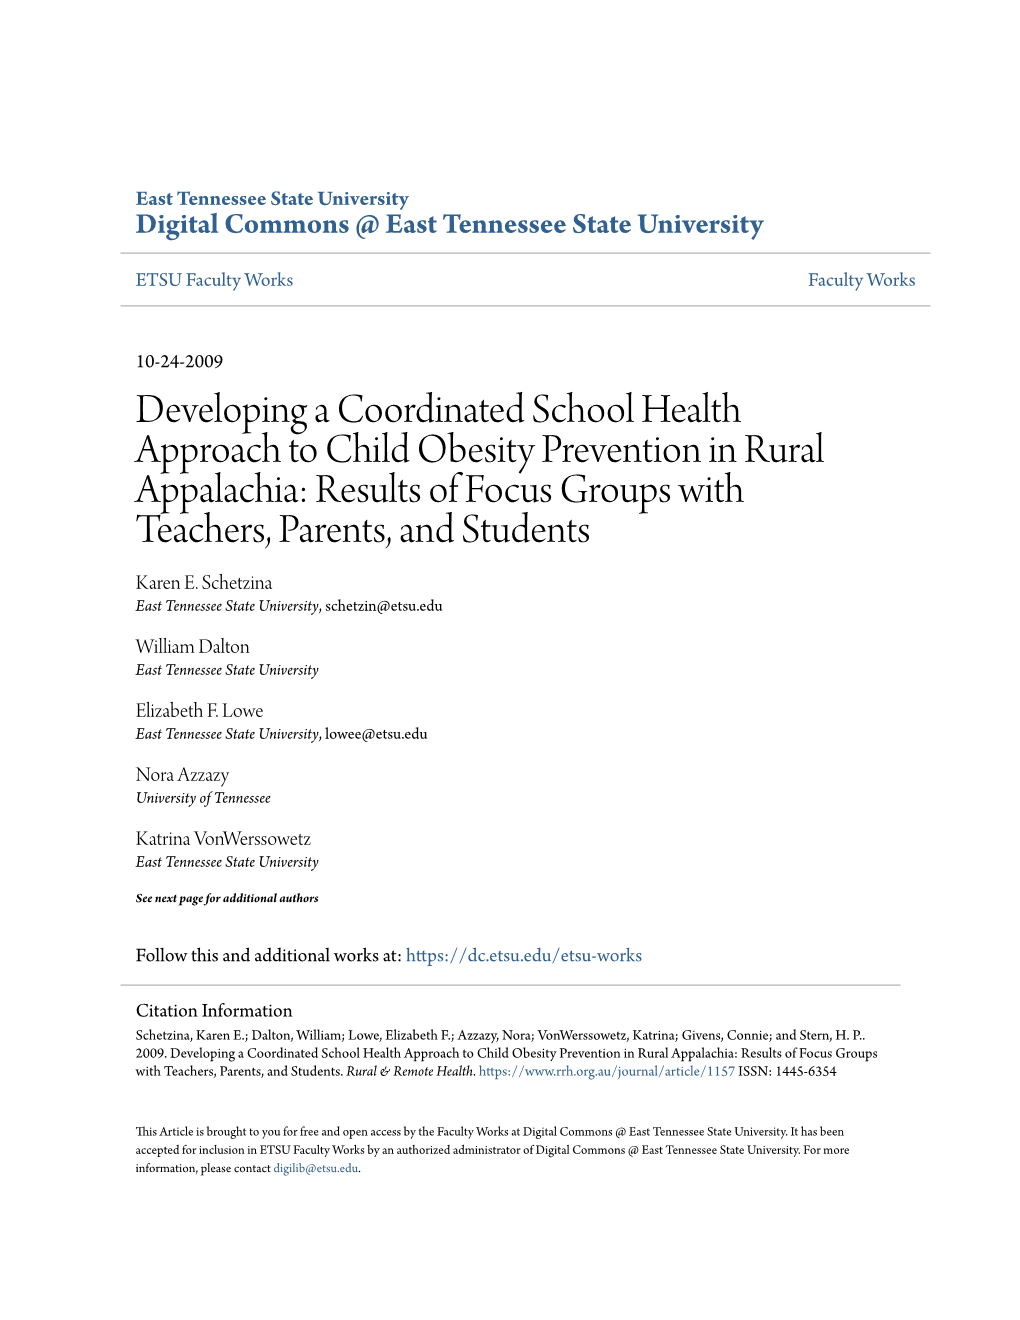 Developing a Coordinated School Health Approach to Child Obesity Prevention in Rural Appalachia: Results of Focus Groups with Teachers, Parents, and Students Karen E